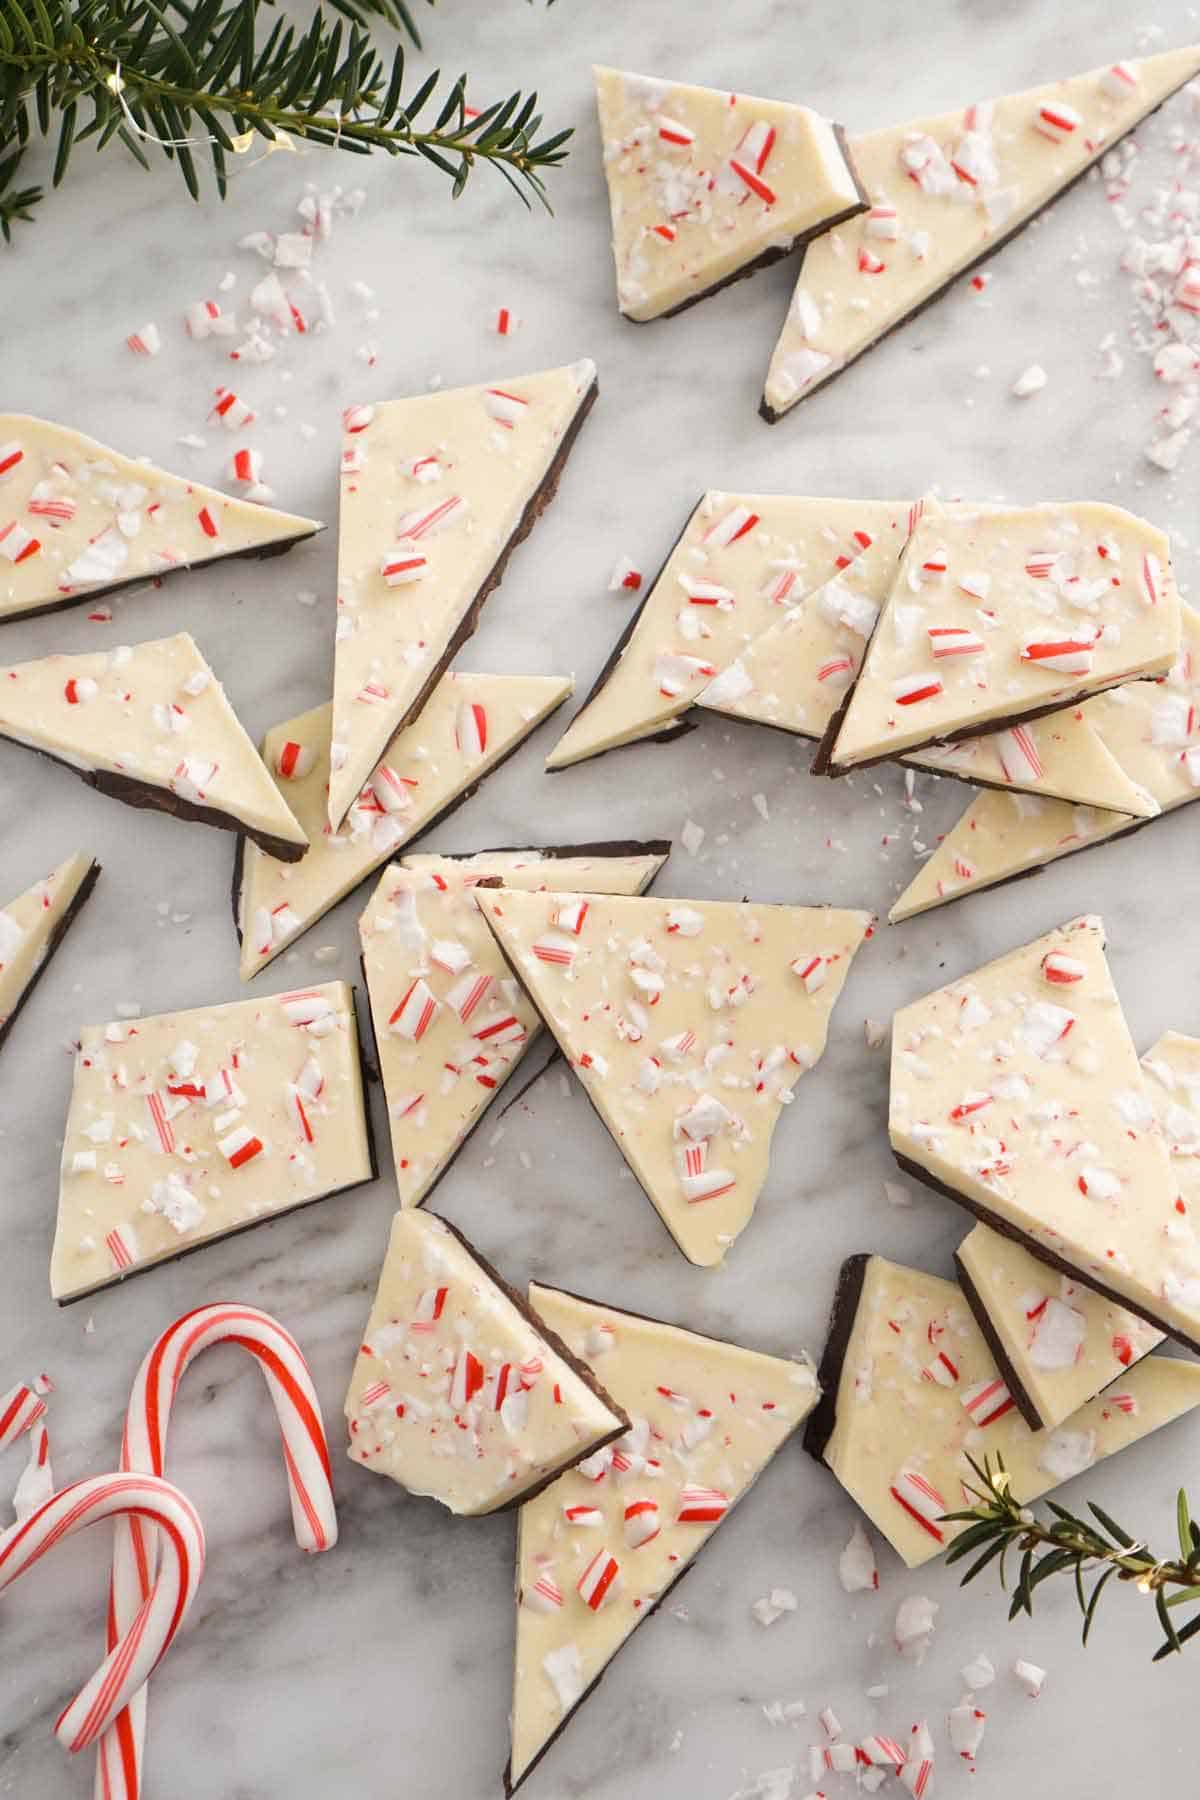 Overhead view of multiple pieces of peppermint bark scattered on a counter surrounded by rosemary and candy canes.